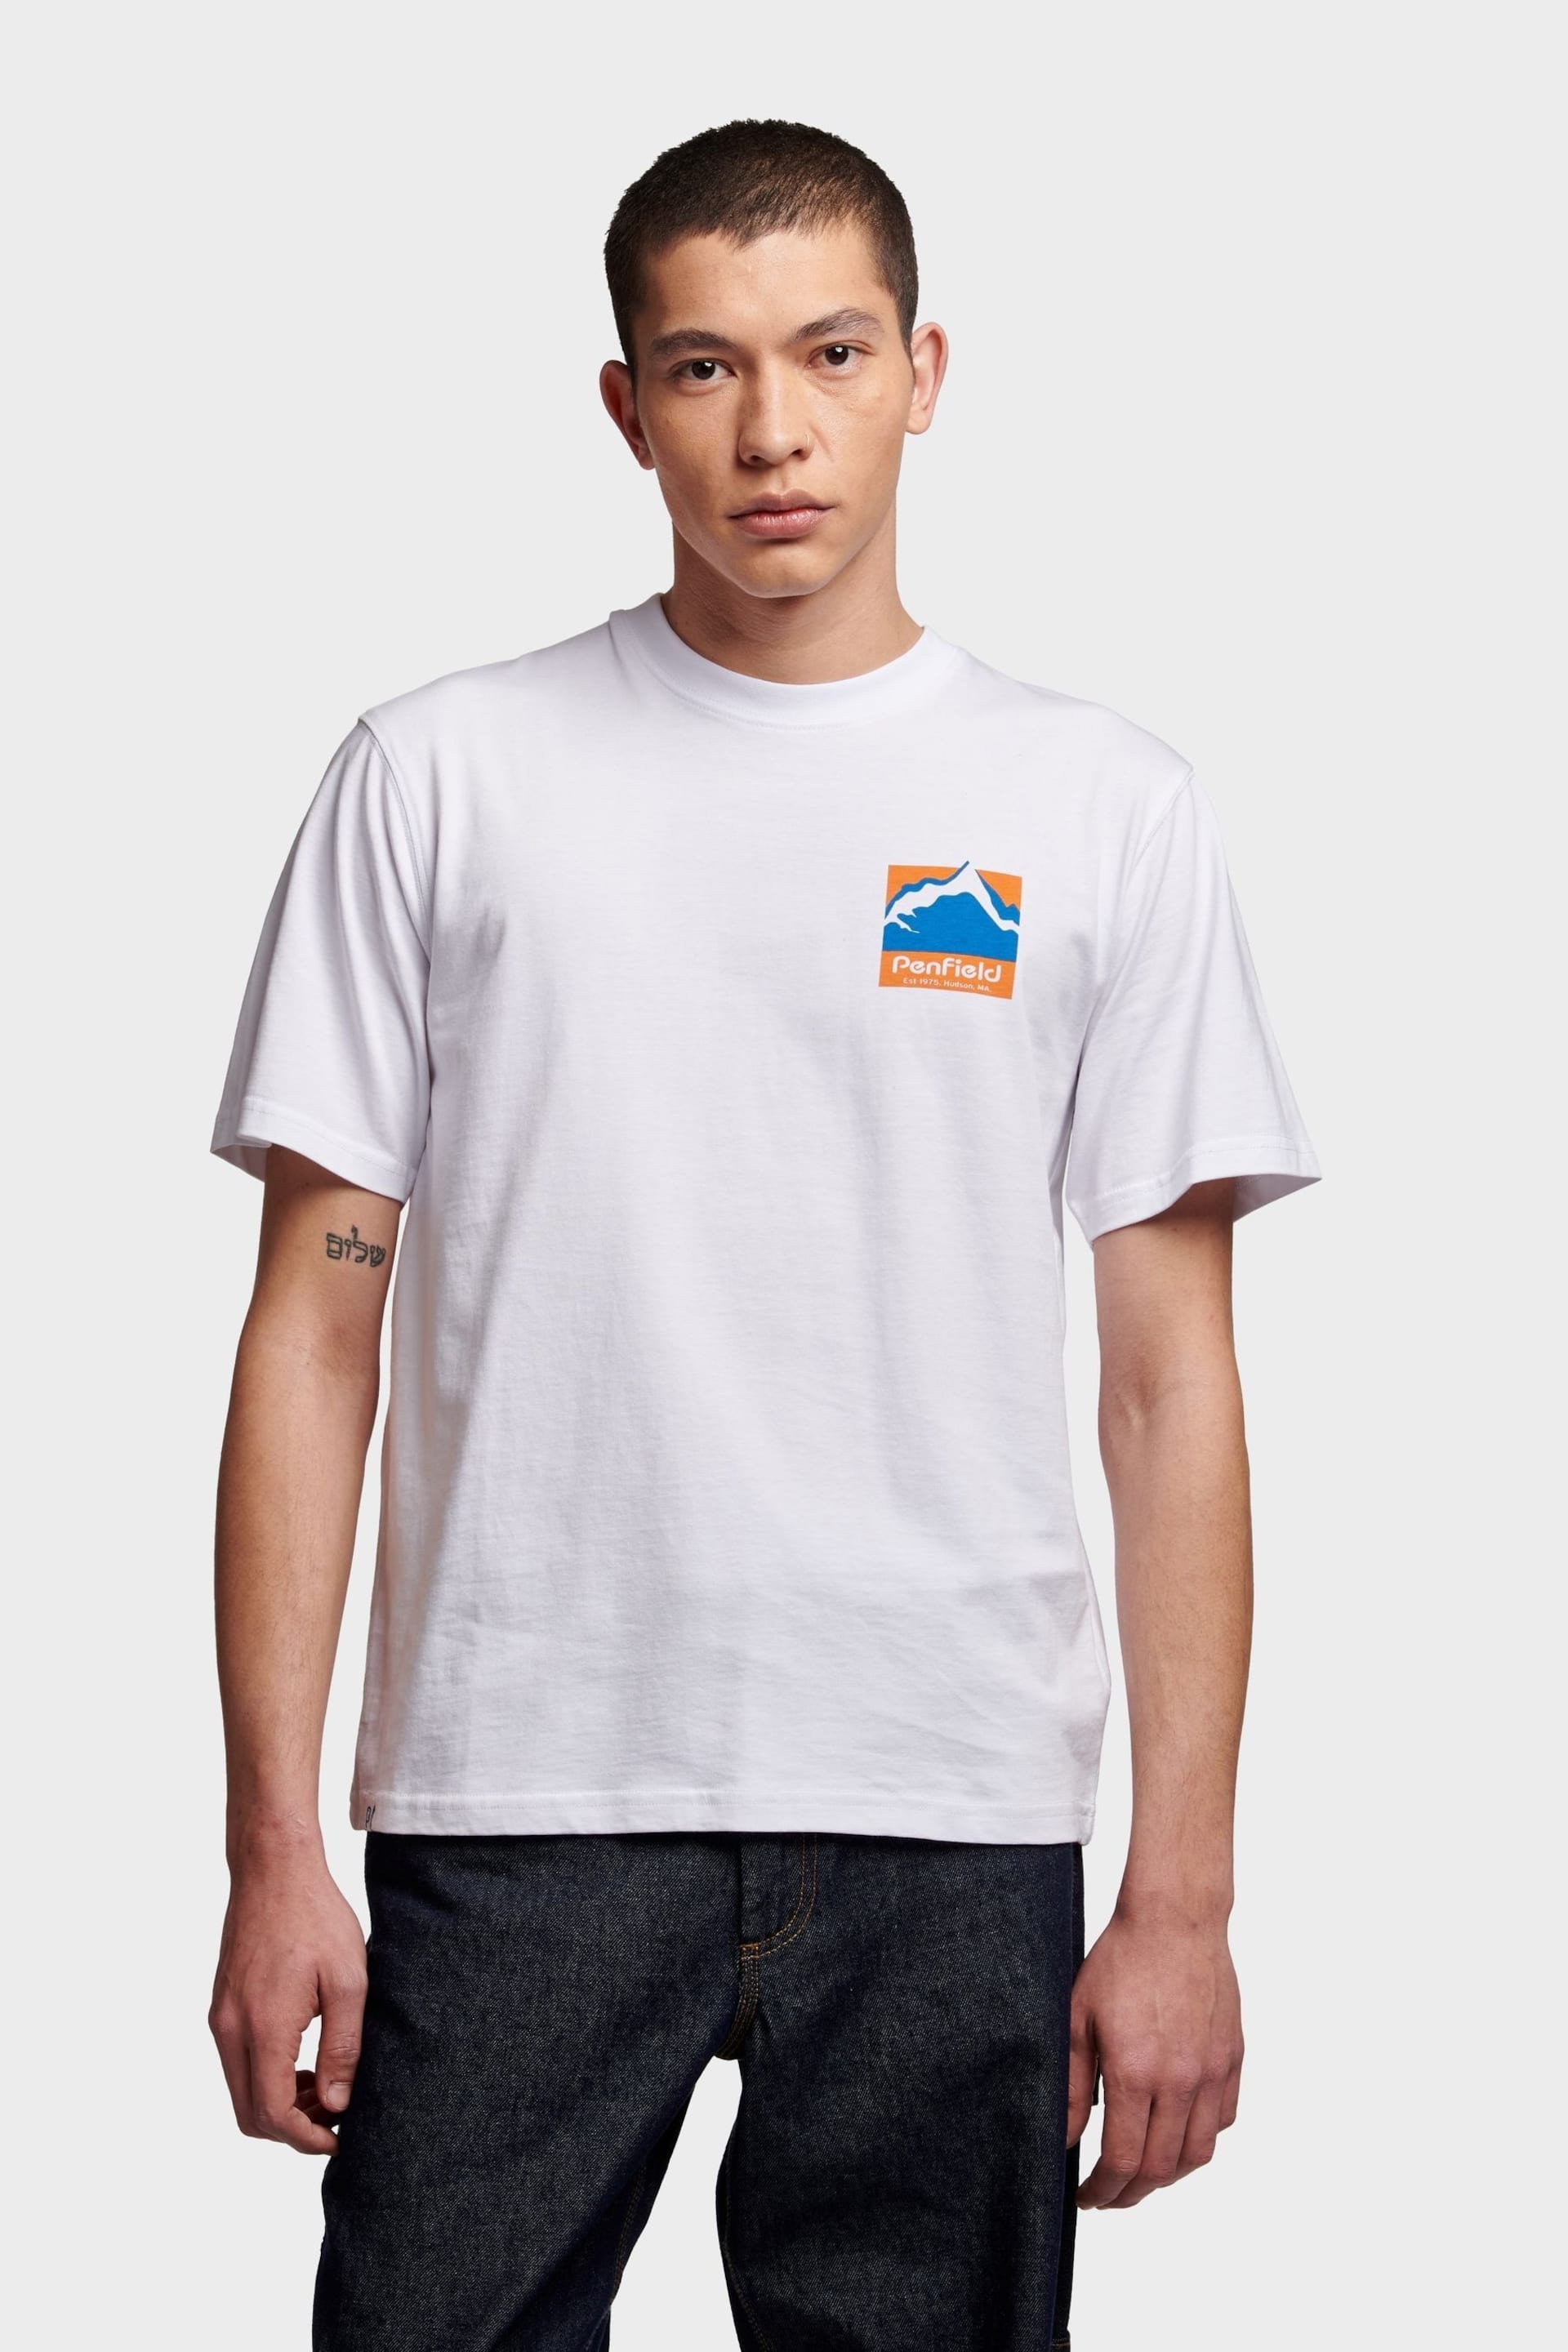 Penfield Mens Relaxed Fit Mountain Scene Back Graphic T-Shirt - Image 1 of 8